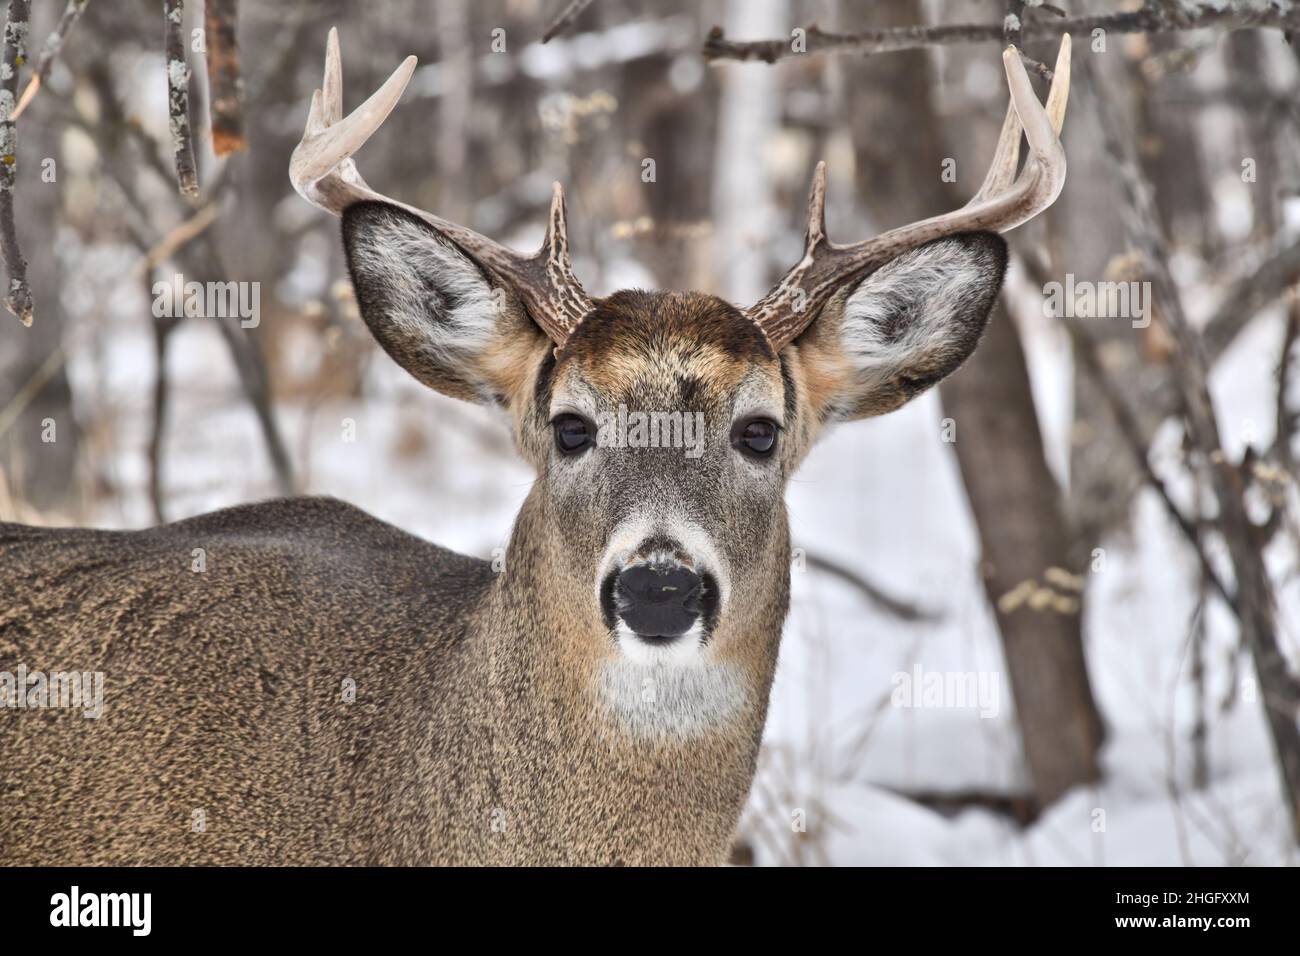 A close up of a white tailed buck looking straight at the camera  at the edge of the snowy woods in wintertime., in Ontario, Canada. Stock Photo